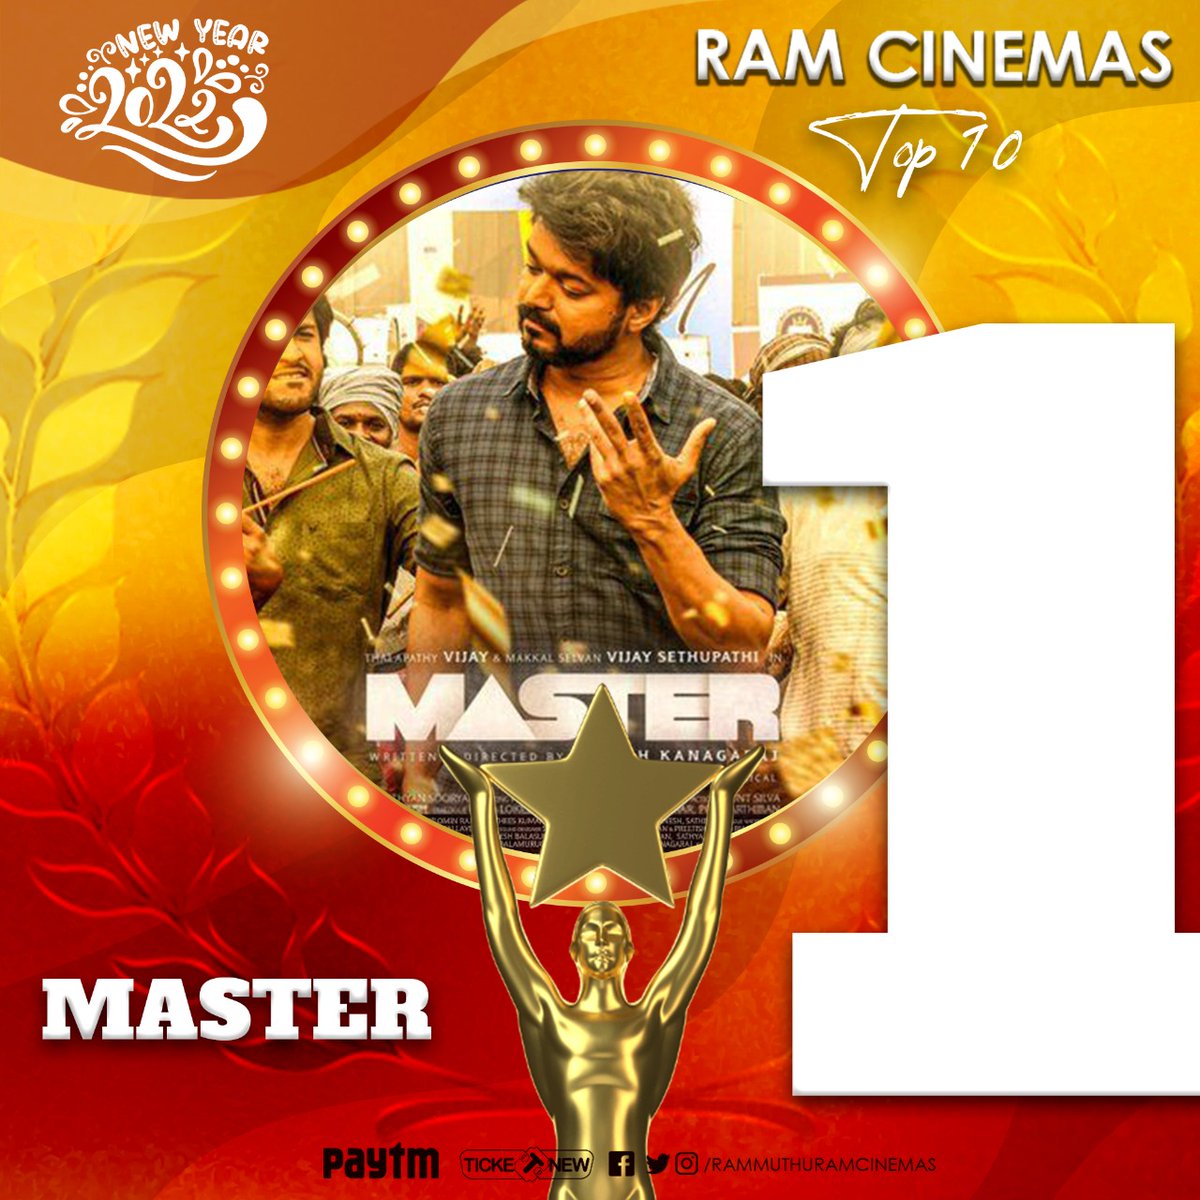 At No 1 #ThalapathyVijay's #Master 
The Saviour of TN Theatres 🔥🙏
If BLOCKBUSTER needs a definition #ThalapathyVijay is the Name 😎
THE NEW NO. 1, I mean
All Time Box Office No .1 by shattering all the previous records in our screen.
MEGA BLOCKBUSTER 
#RamCinemasTop10